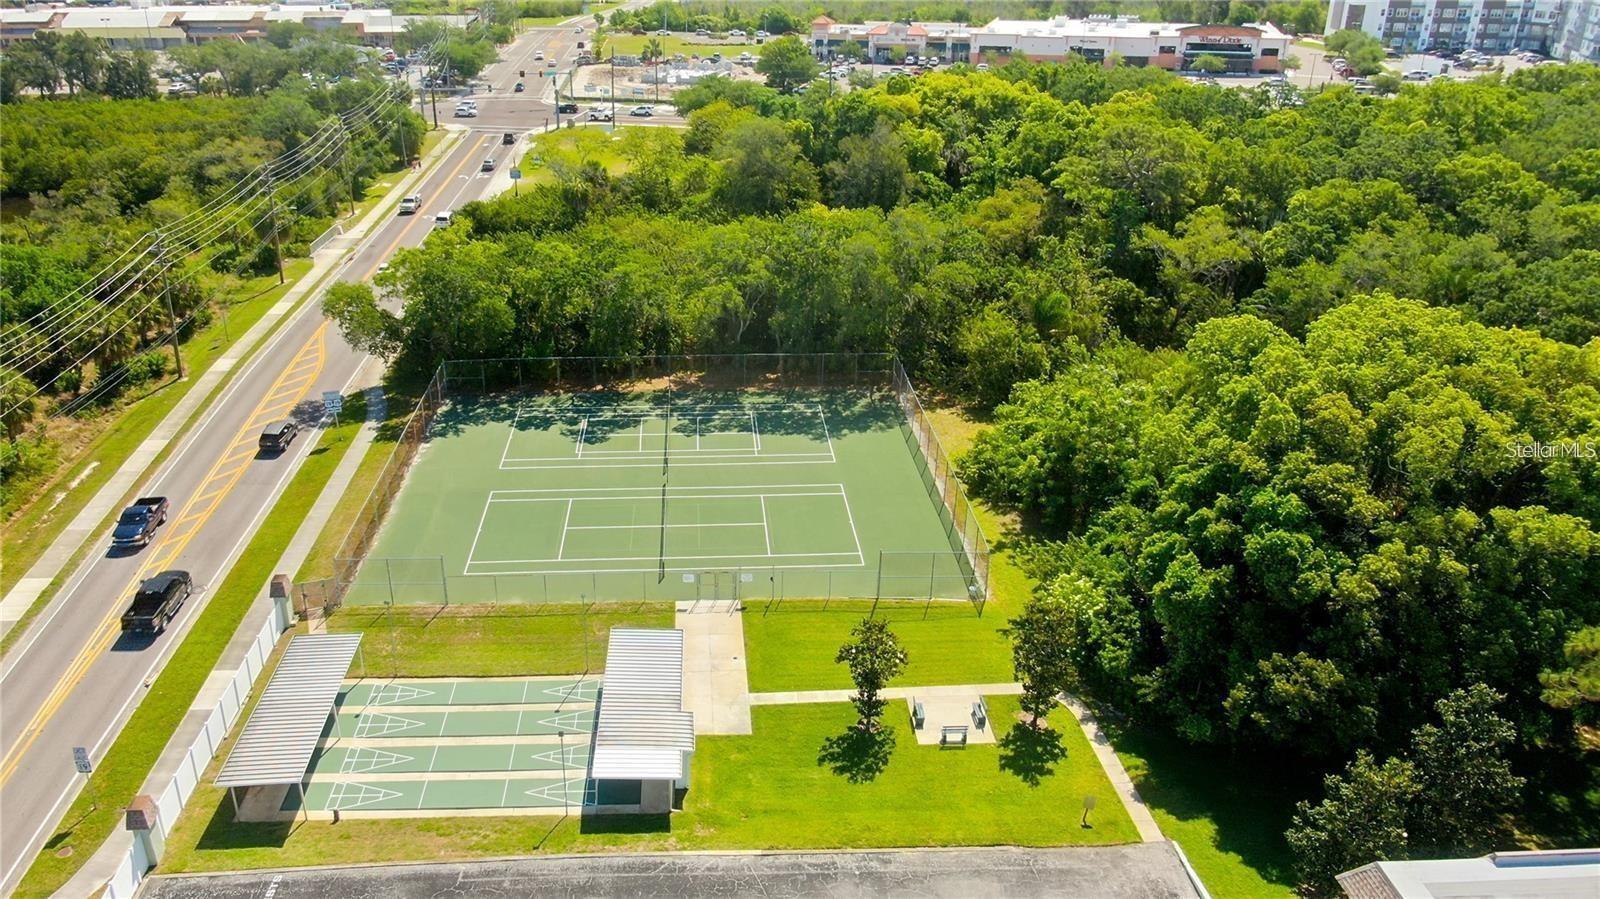 Tennis/pickle ball courts